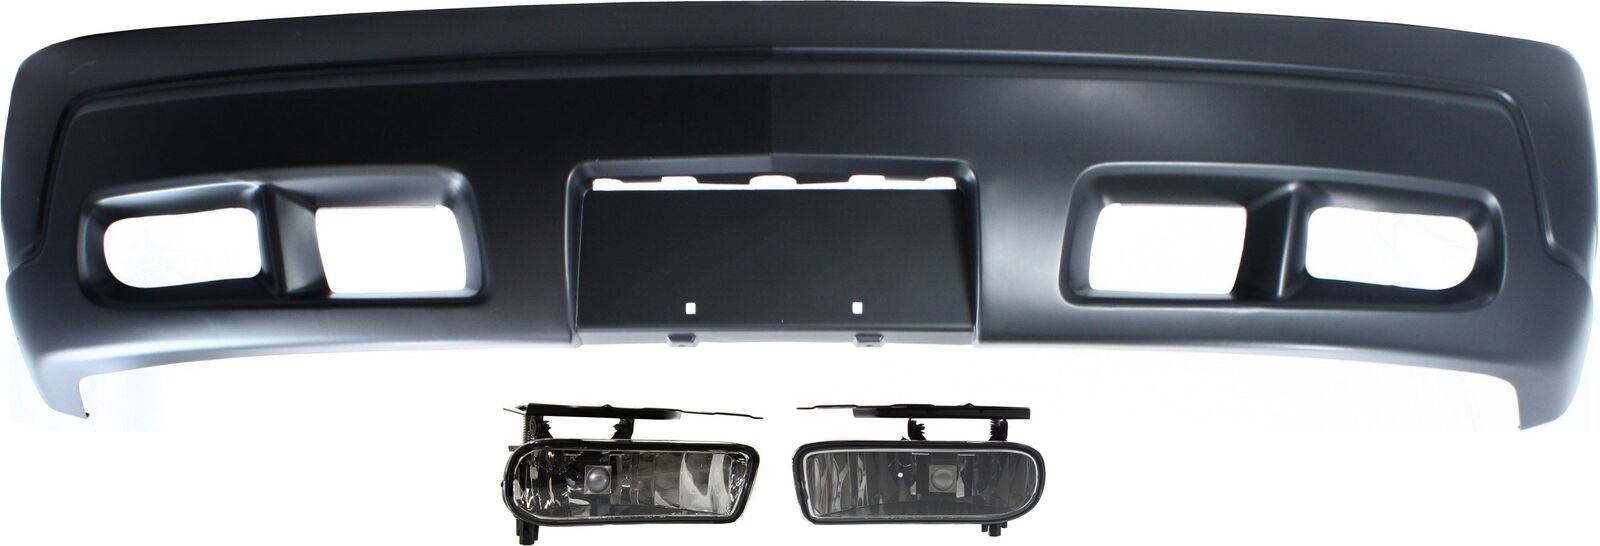 Front Bumper Cover for Cadillac Escalade 2002-2006, 3-Piece Kit with Fog Lights,